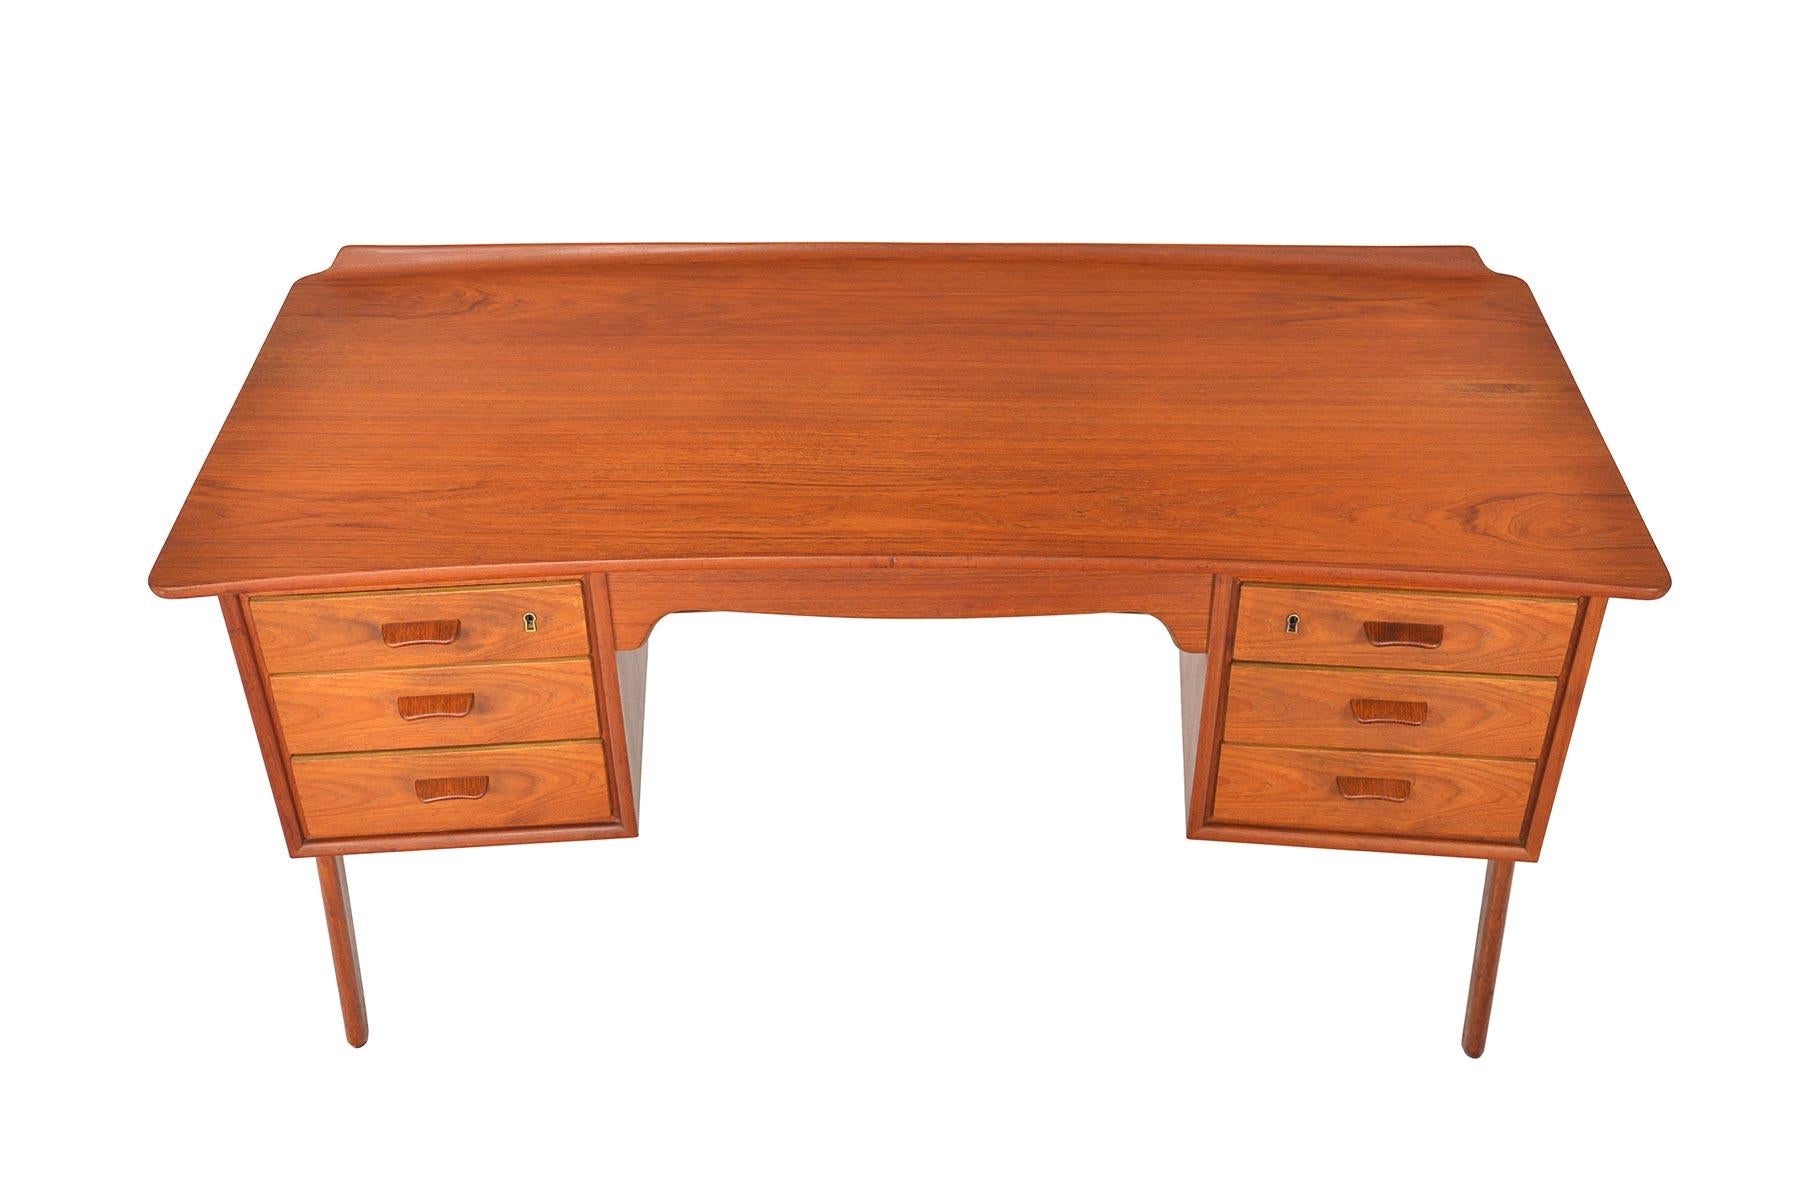 This gorgeous Danish modern model SH-180 executive desk was designed by Svend Madsen for Sigurd Hansen in the 1960s. Exterior mounted legs provide this piece a stunning atomic silhouette. Kneehole is flanked by two bays of three drawers. Finished